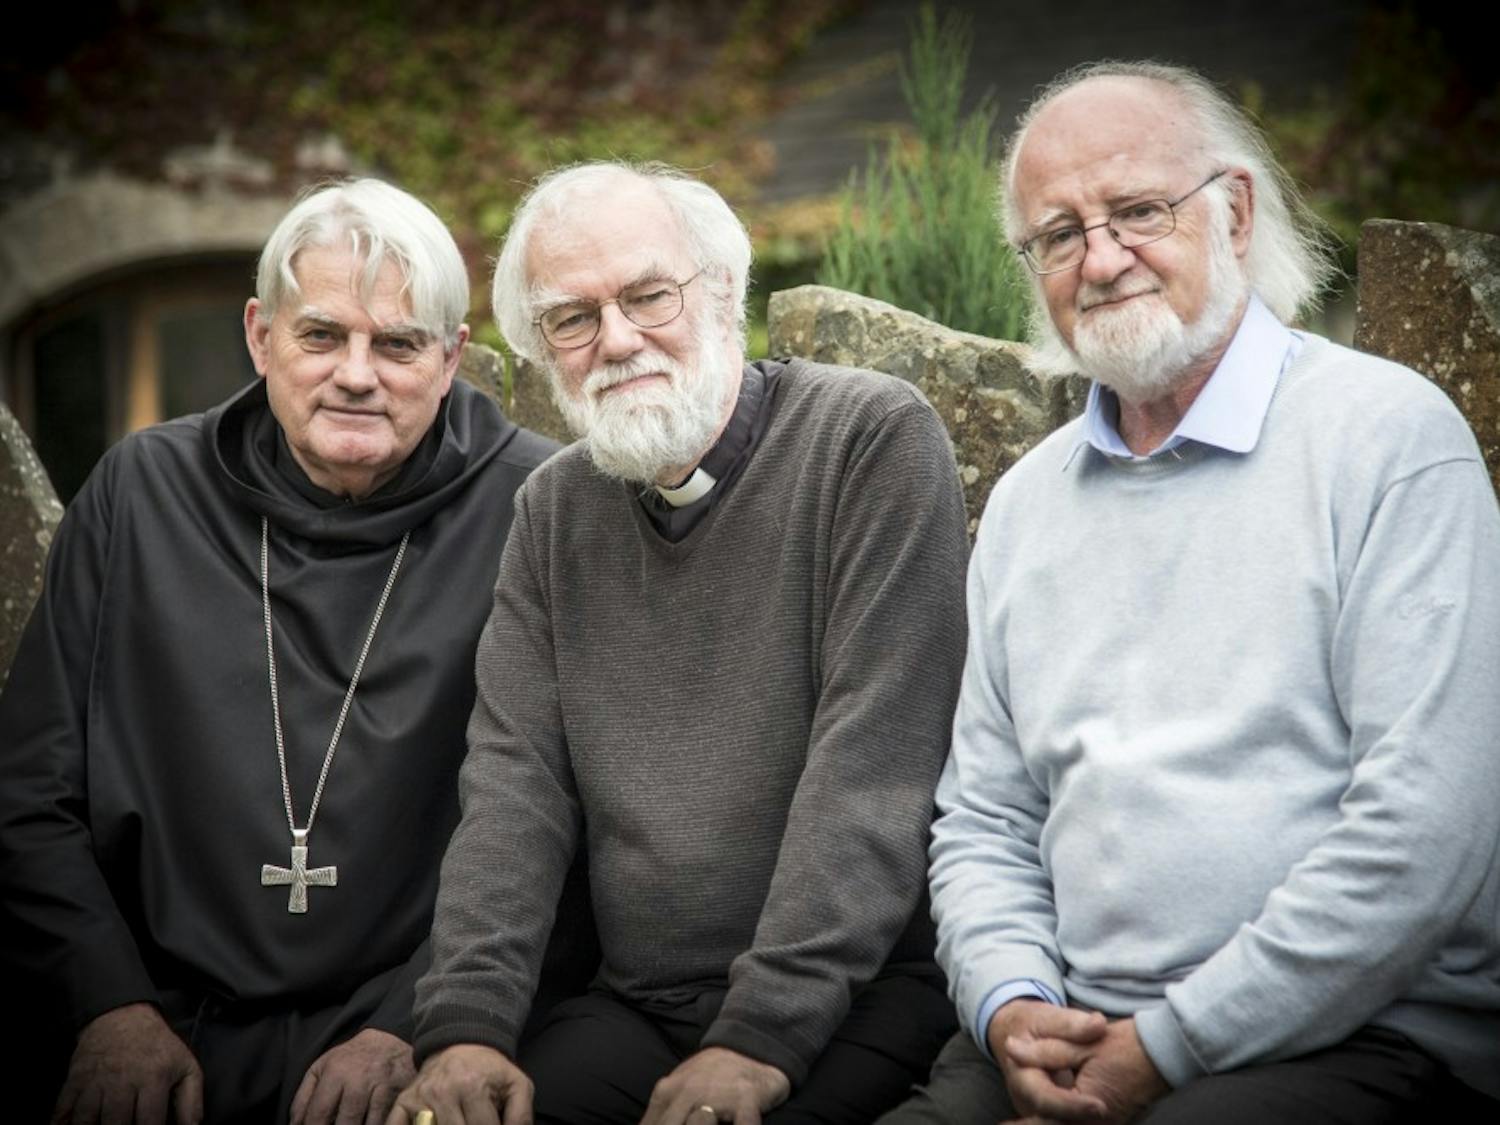 From left, abbott Mark Patrick Hederman,&nbsp;bishop Rowan Williams and poet&nbsp;John F. Deane pose for a photo&nbsp;at a retreat offered by Deane and Williams to the monks of Glenstal Abbey.